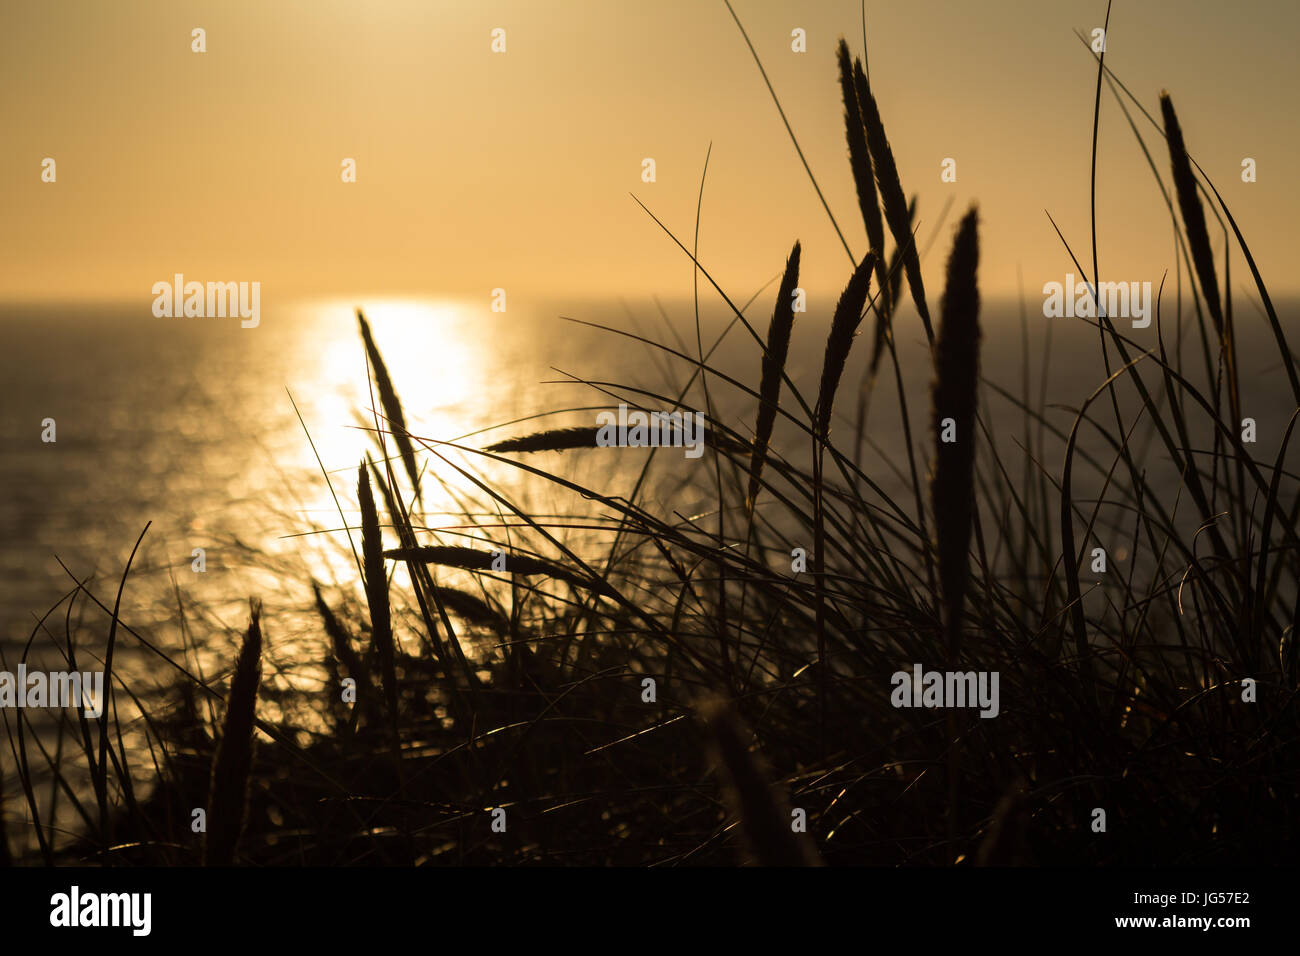 Lyme grass in silhouette against the sun setting over the sea Stock Photo